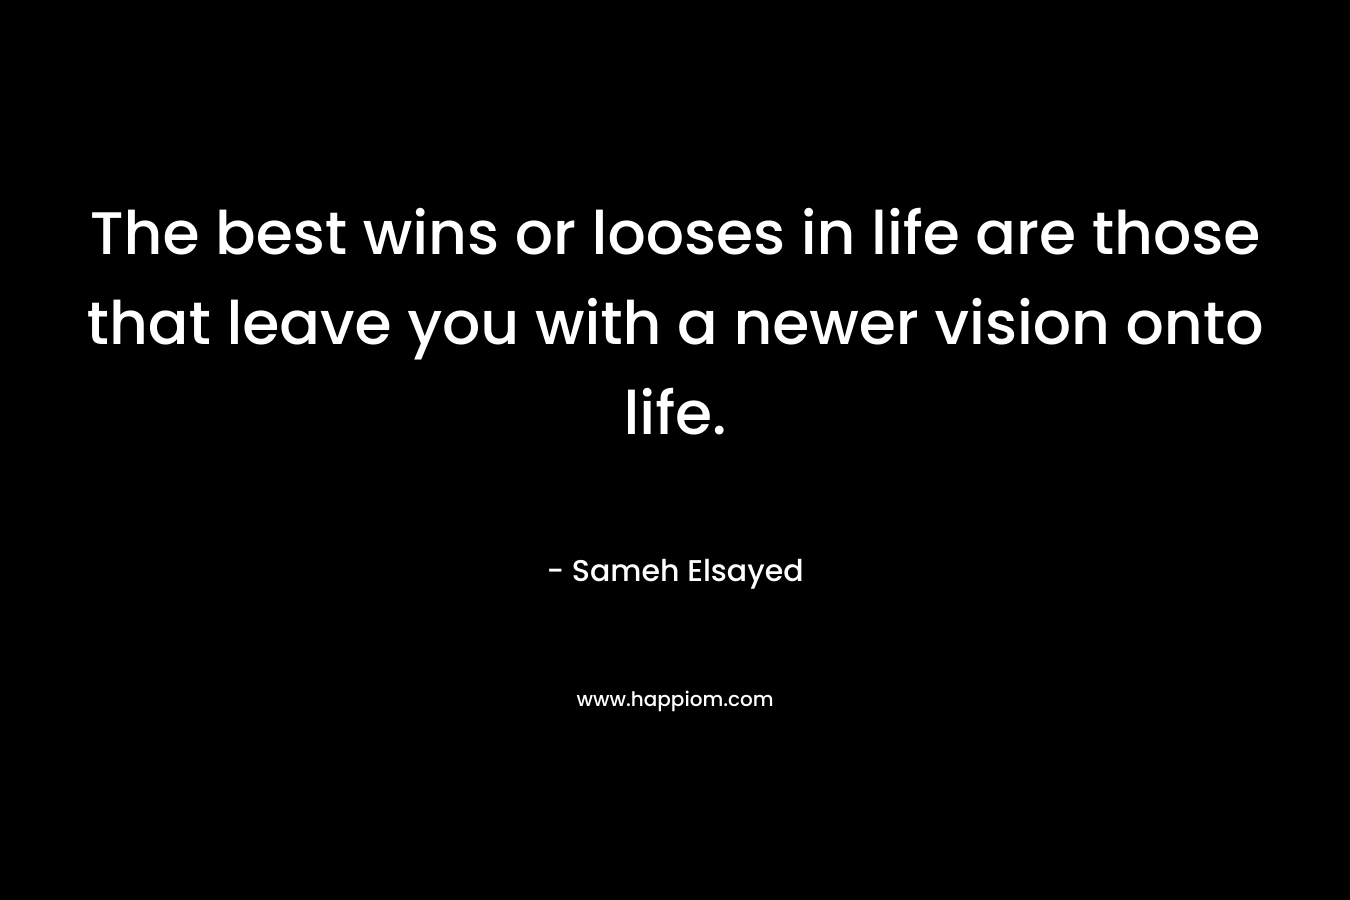 The best wins or looses in life are those that leave you with a newer vision onto life. – Sameh Elsayed